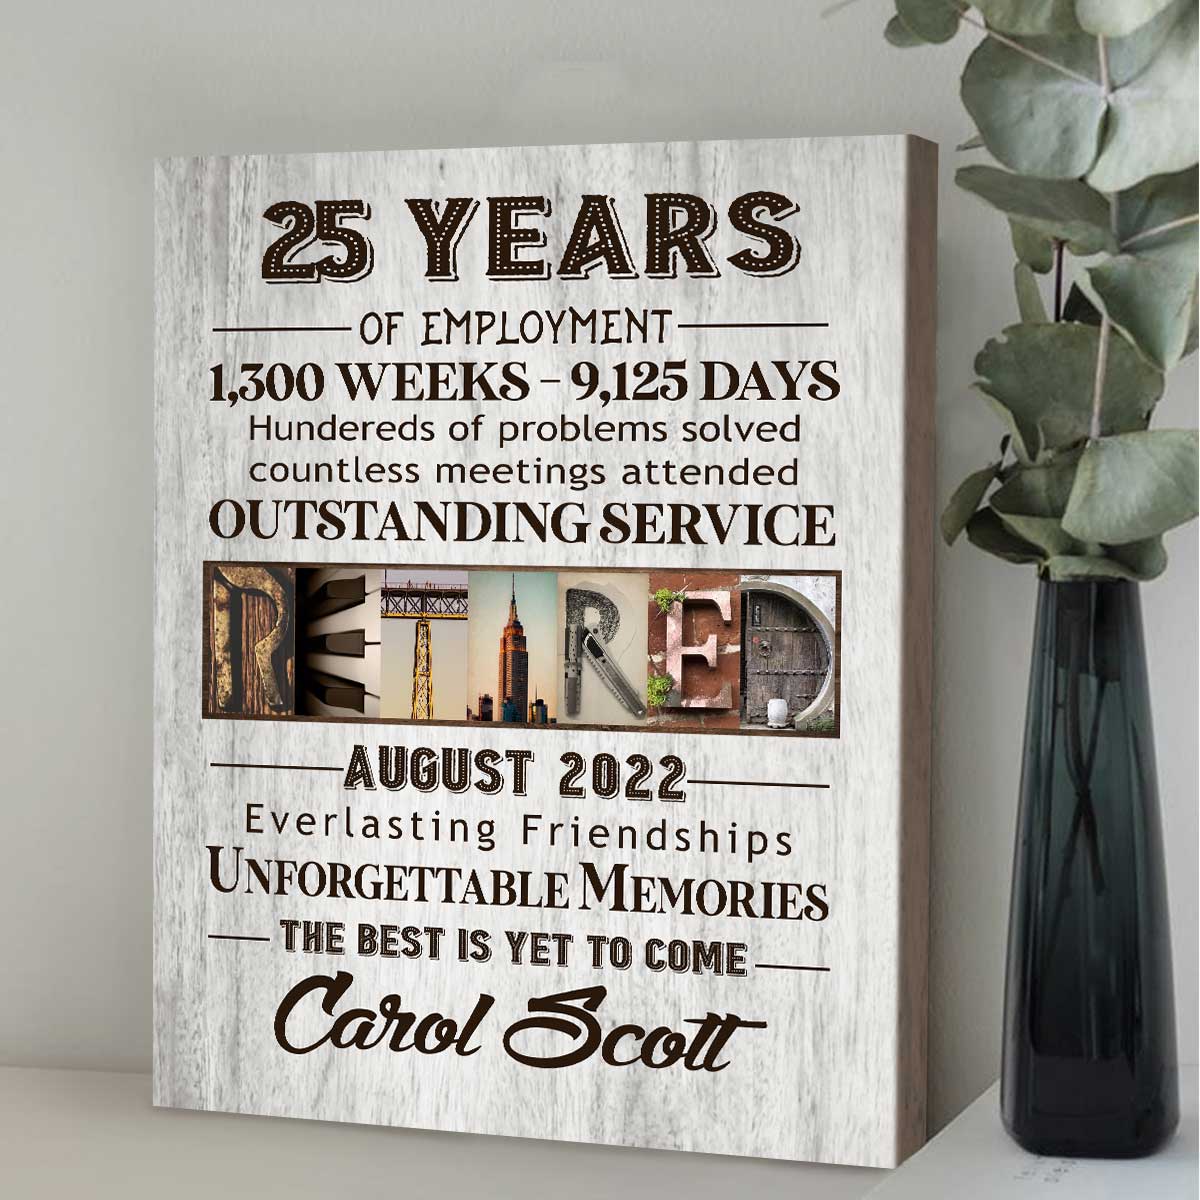 Retirement Gifts for Women / Custom Retirement Art / Retirement Party /  Happy Retirement / Wood Print / Unique Gift Ideas / Personalized 